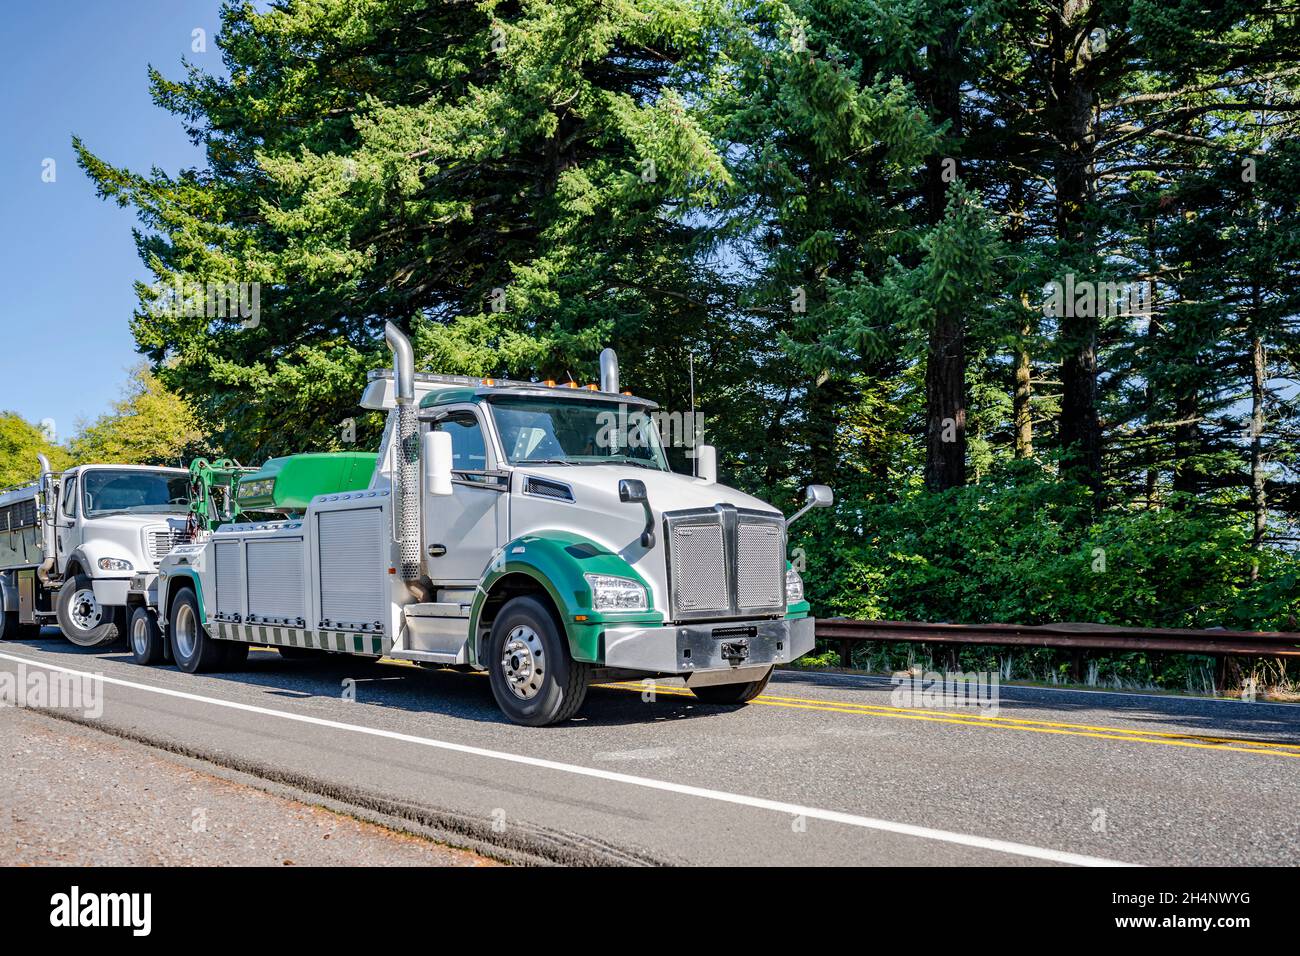 Green and white powerful road assistant big rig towing semi truck tow another broken semi truck transporting it to repair shop running on the road alo Stock Photo